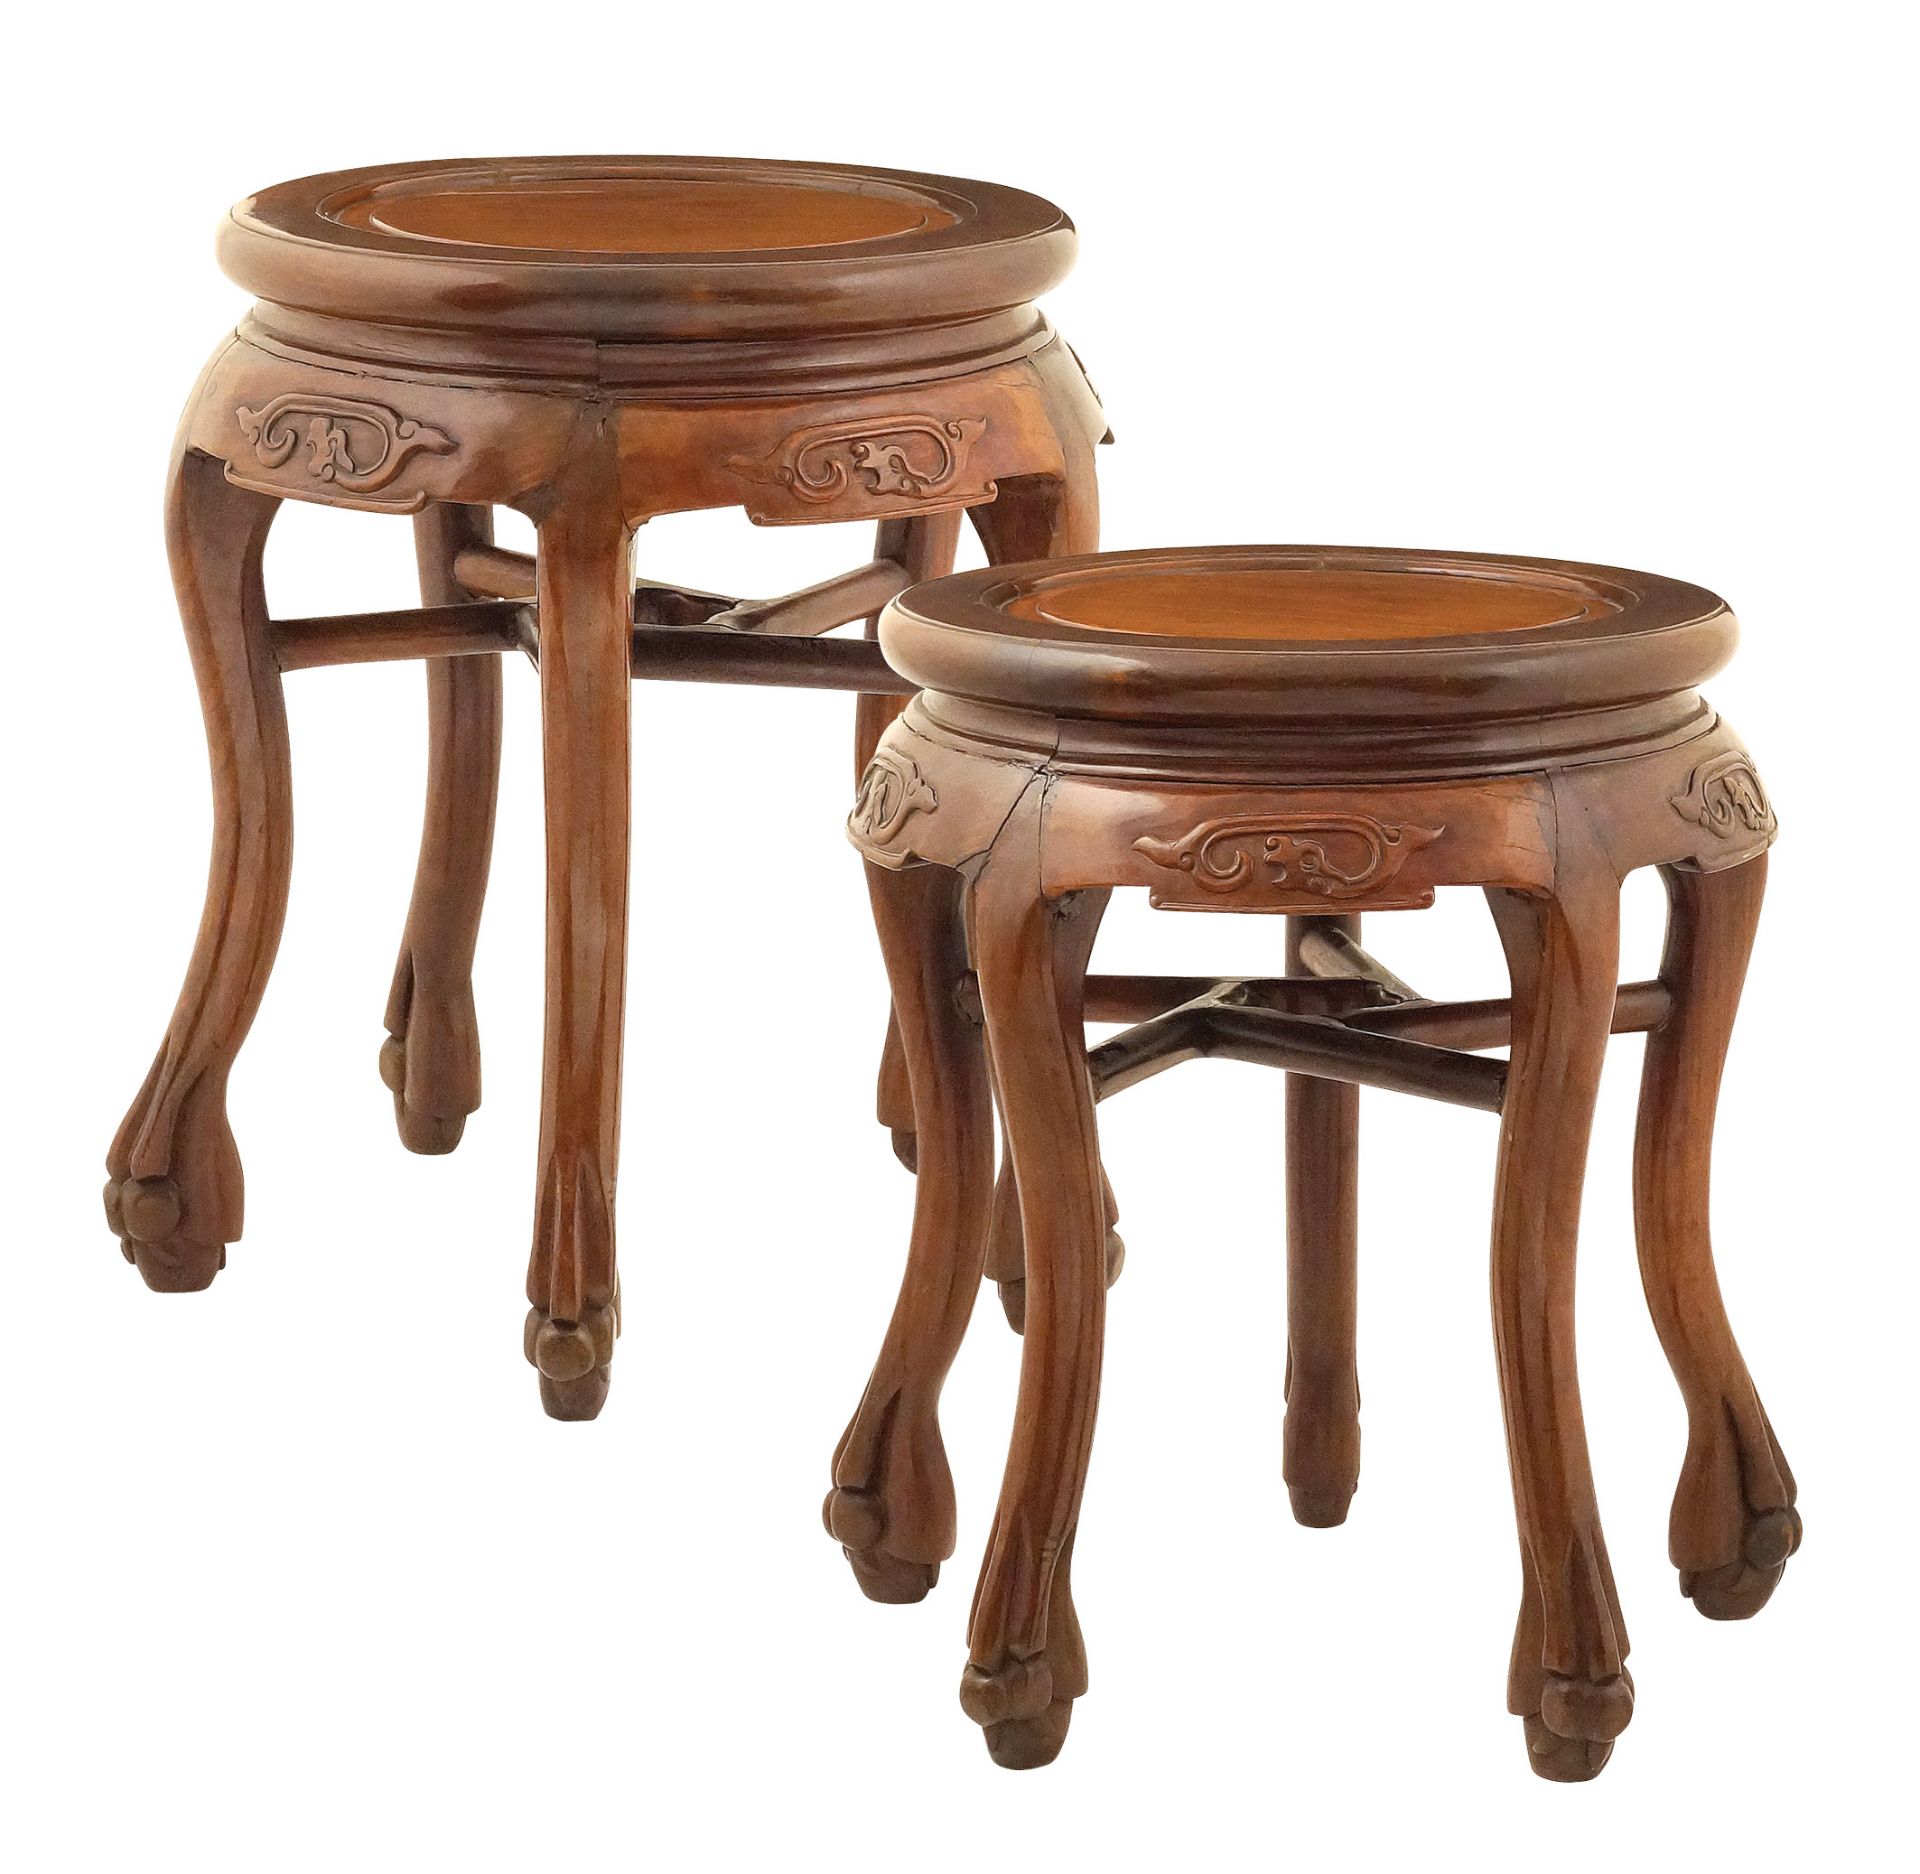 A pair of Chinese mahogany vase stands